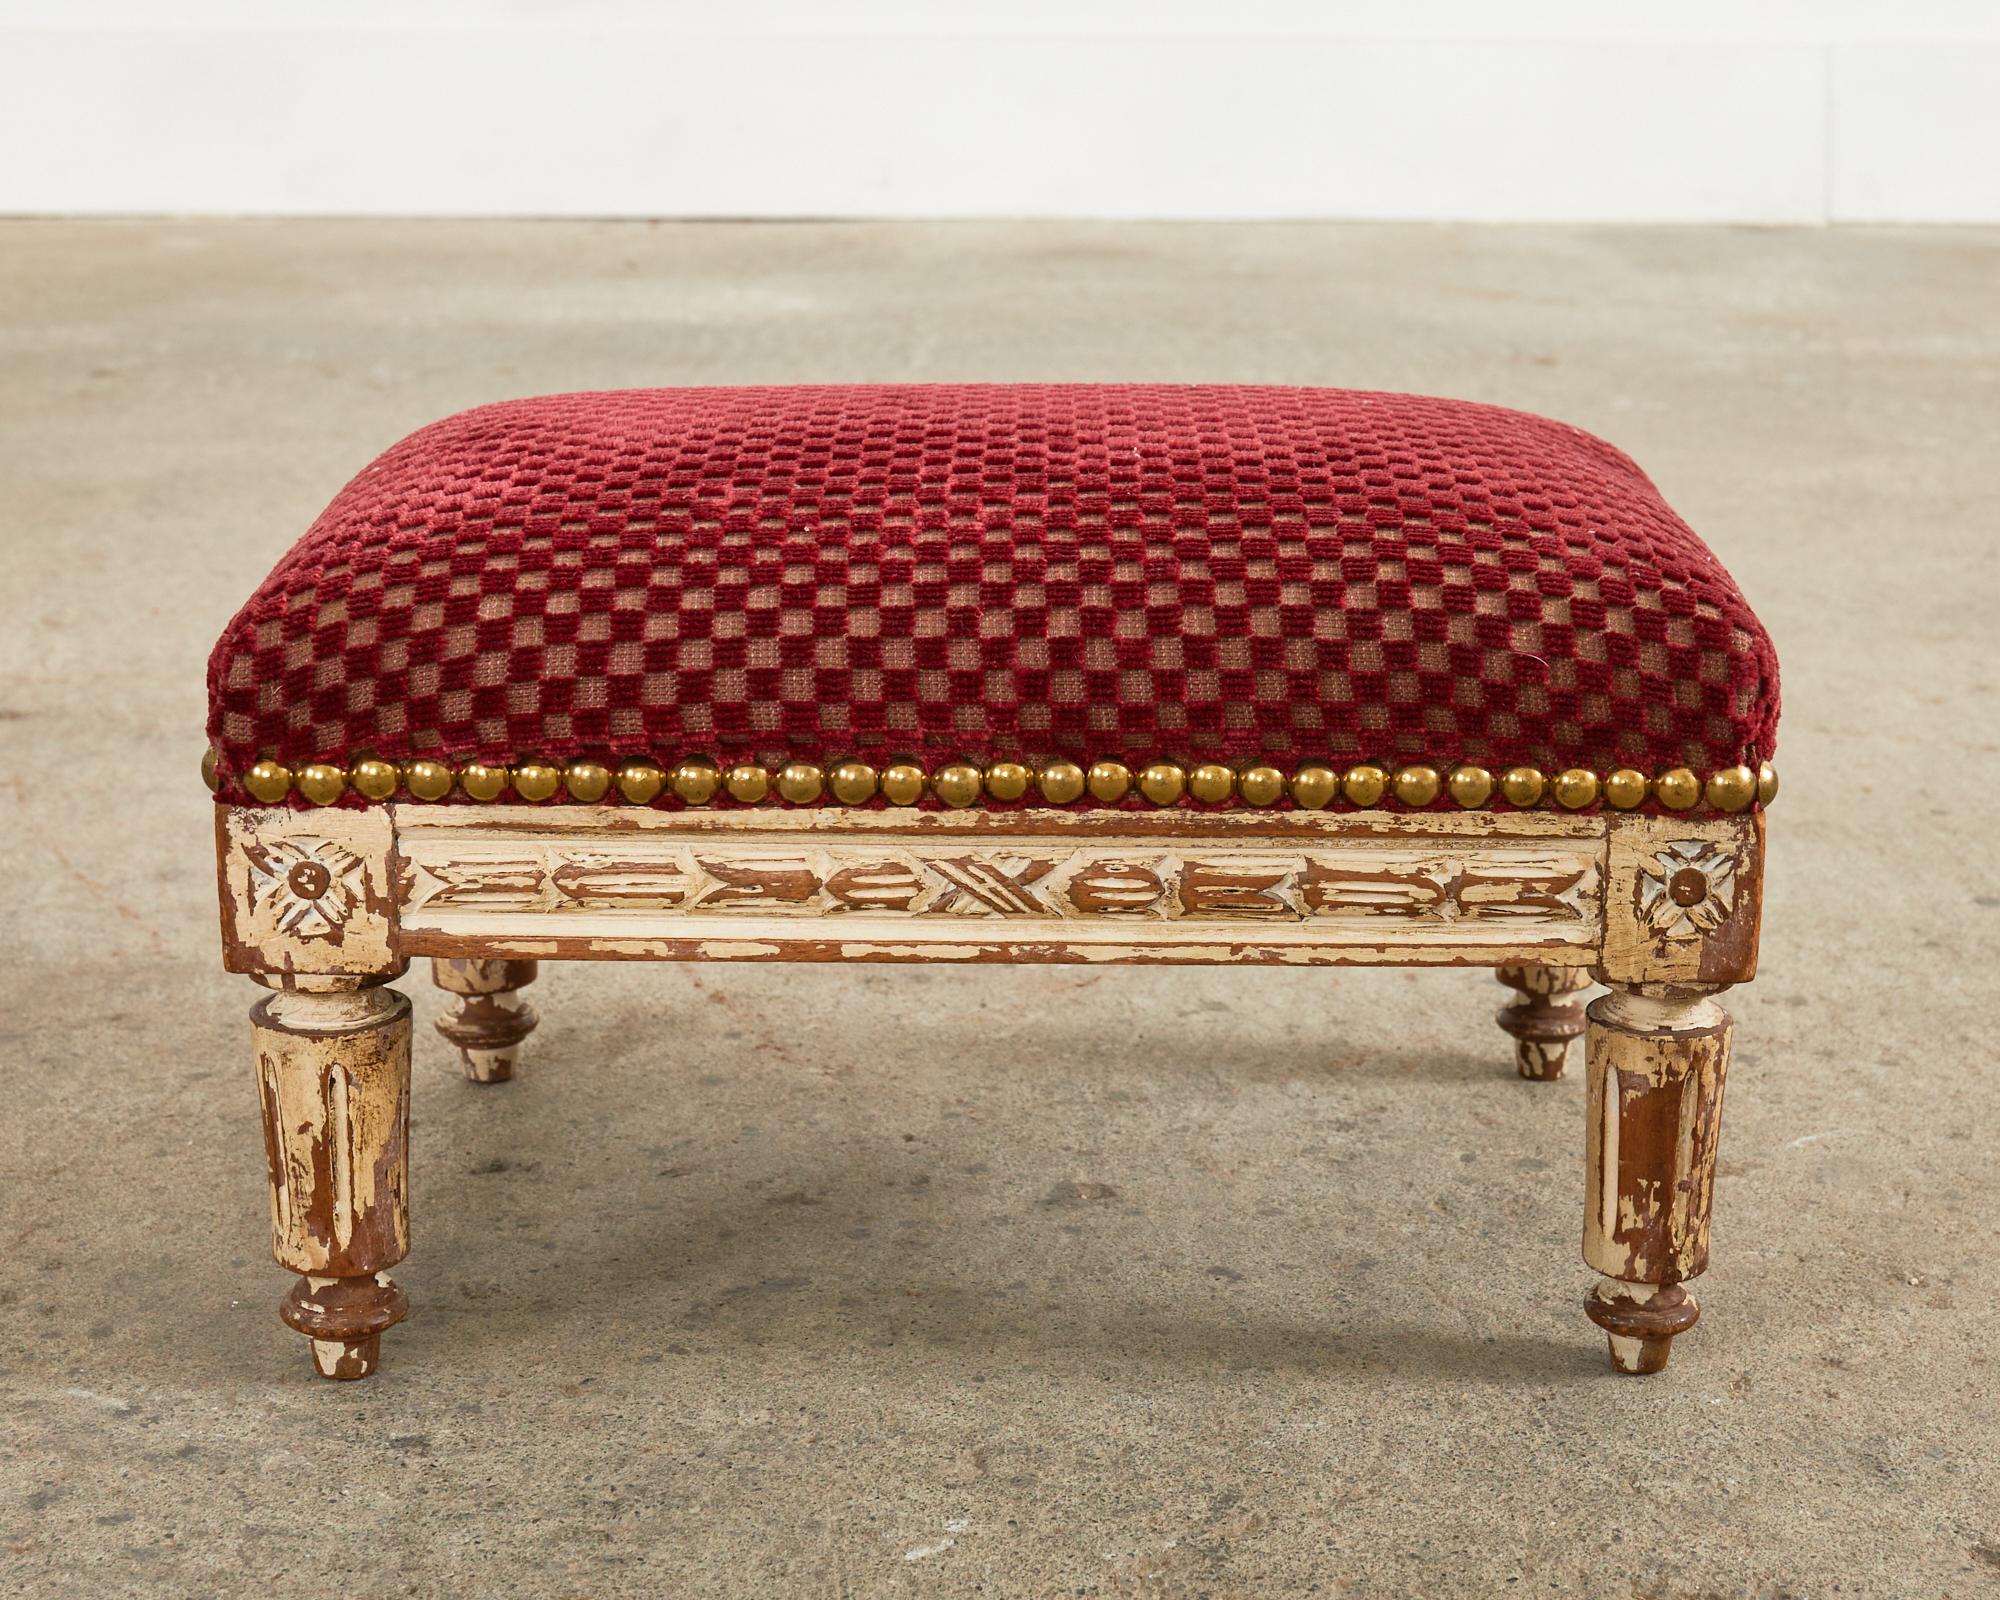 Hand-Crafted 19th Century French Louis XVI Diminutive Painted Mahogany Footstool For Sale